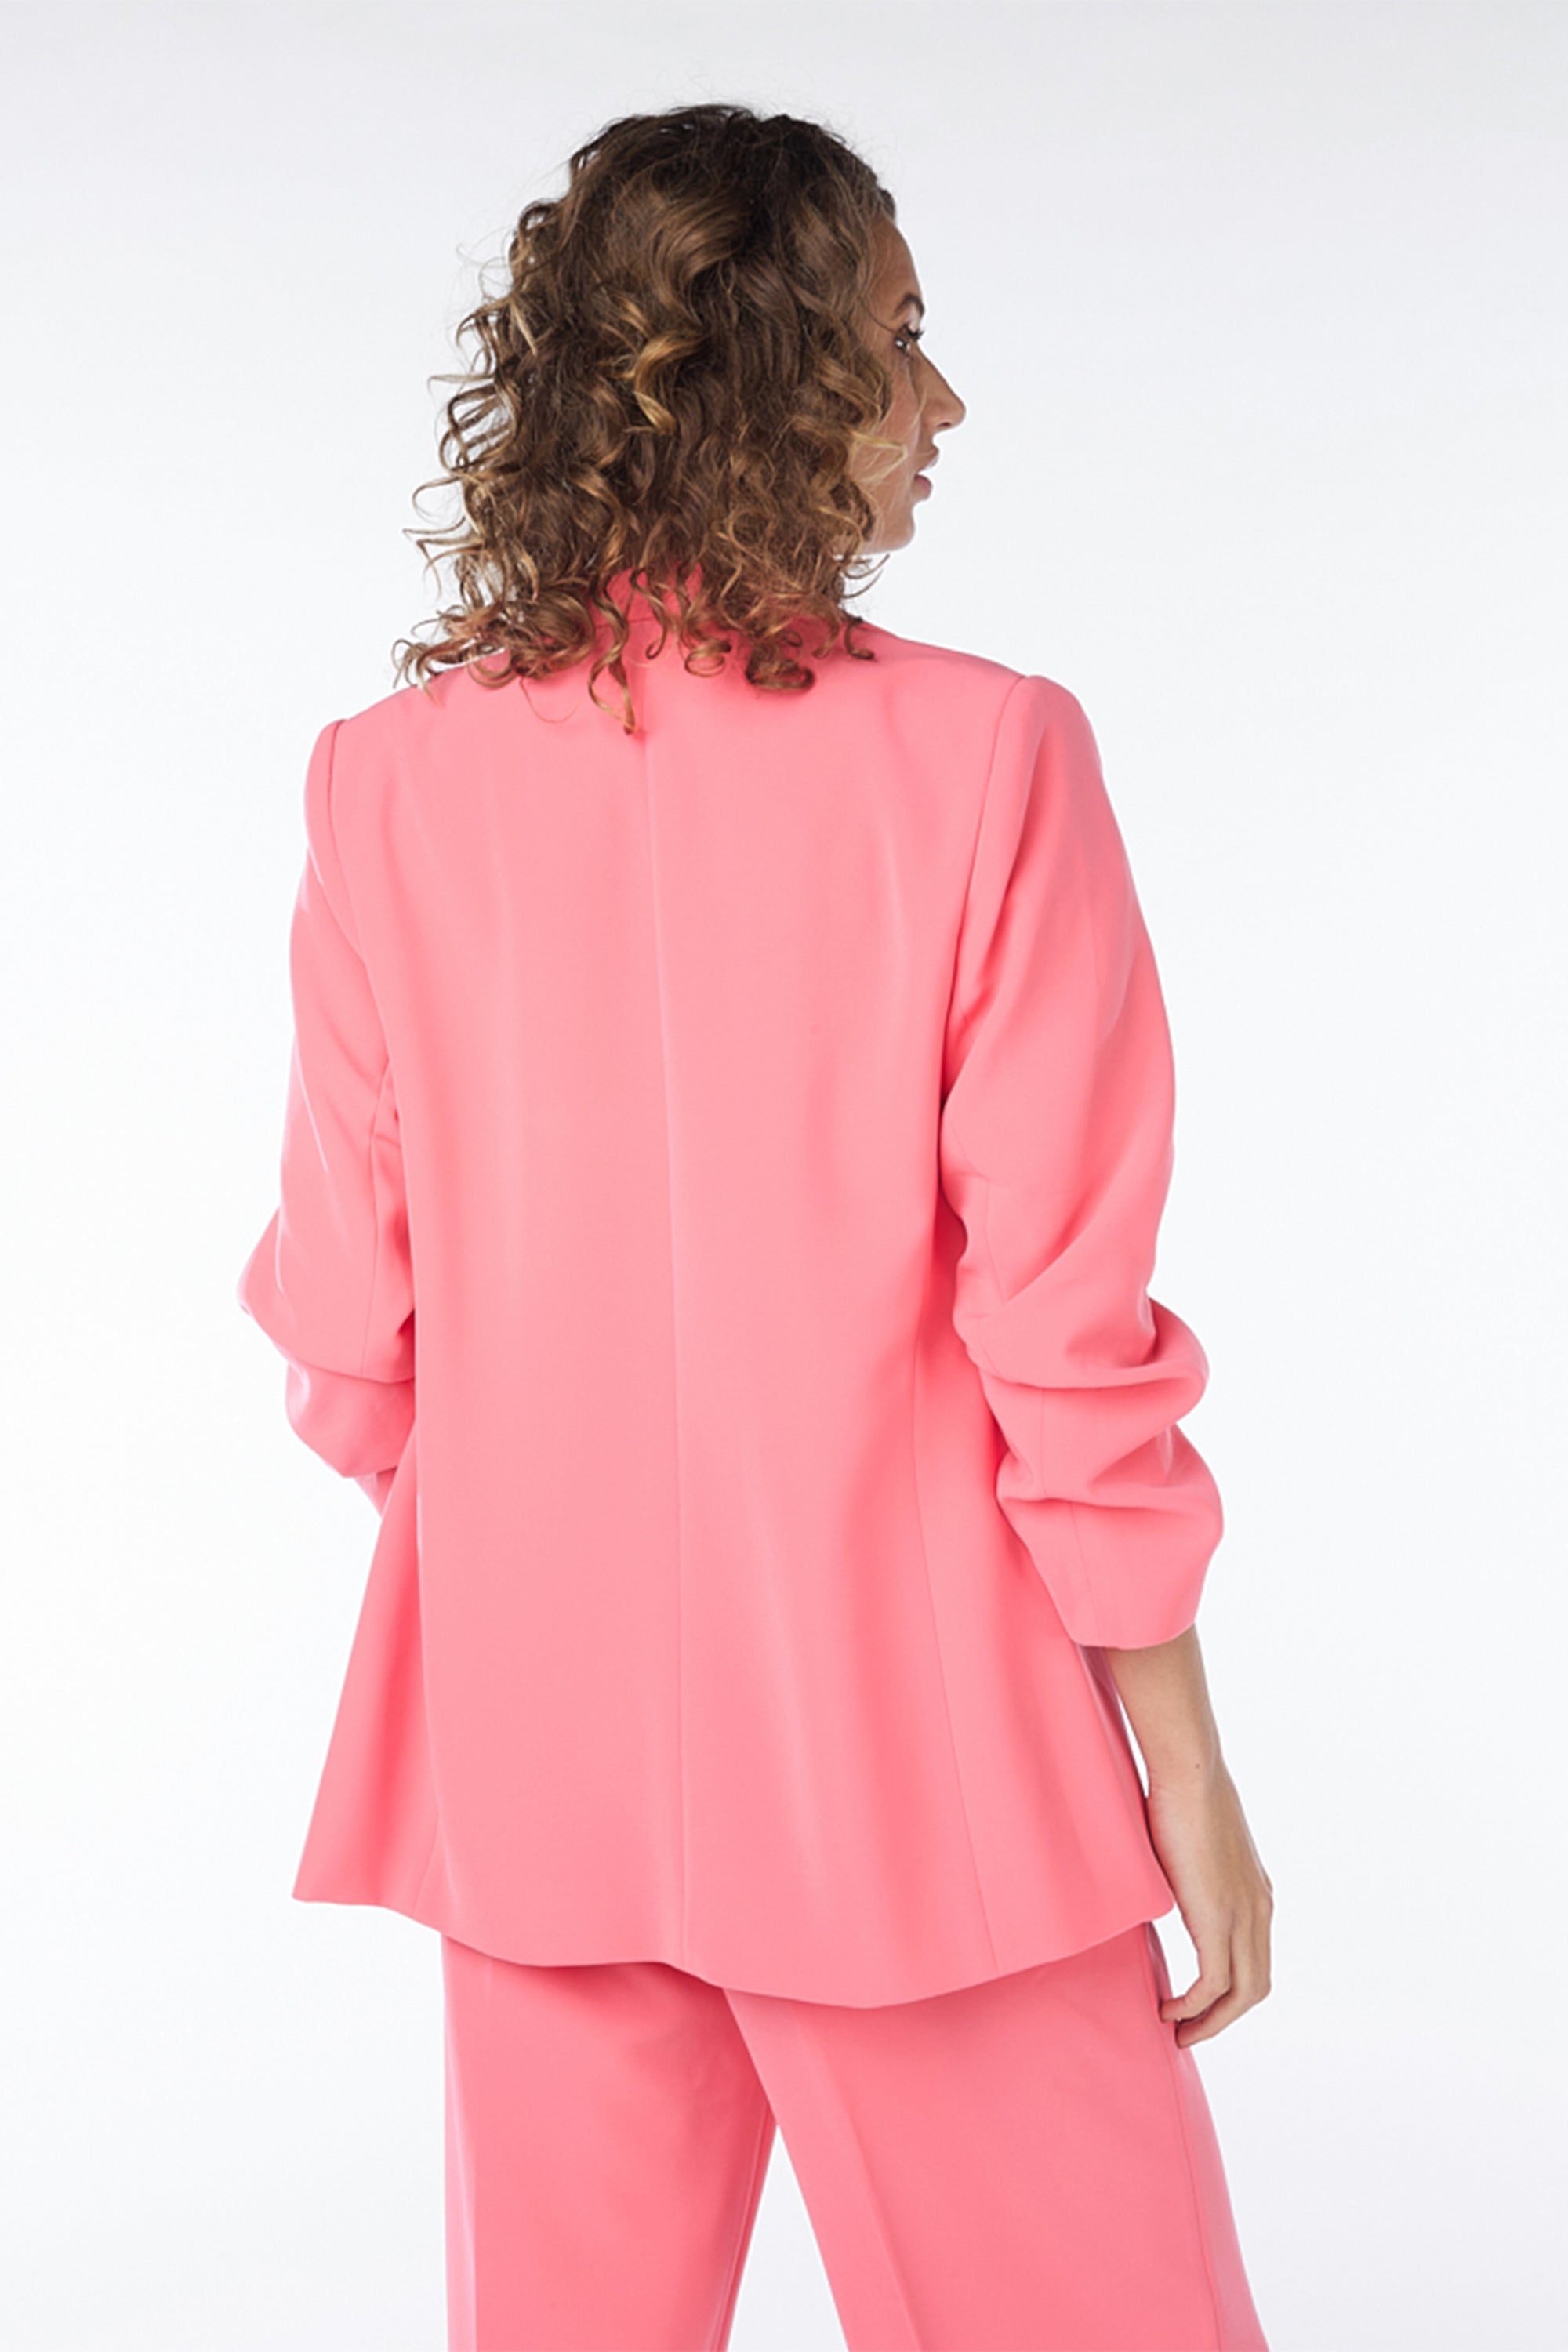 Back view of Esqulao (SP2410023) Women's Ruched 3/4 Sleeve Open Front Blazer with Flap Pockets in Strawberry Pink